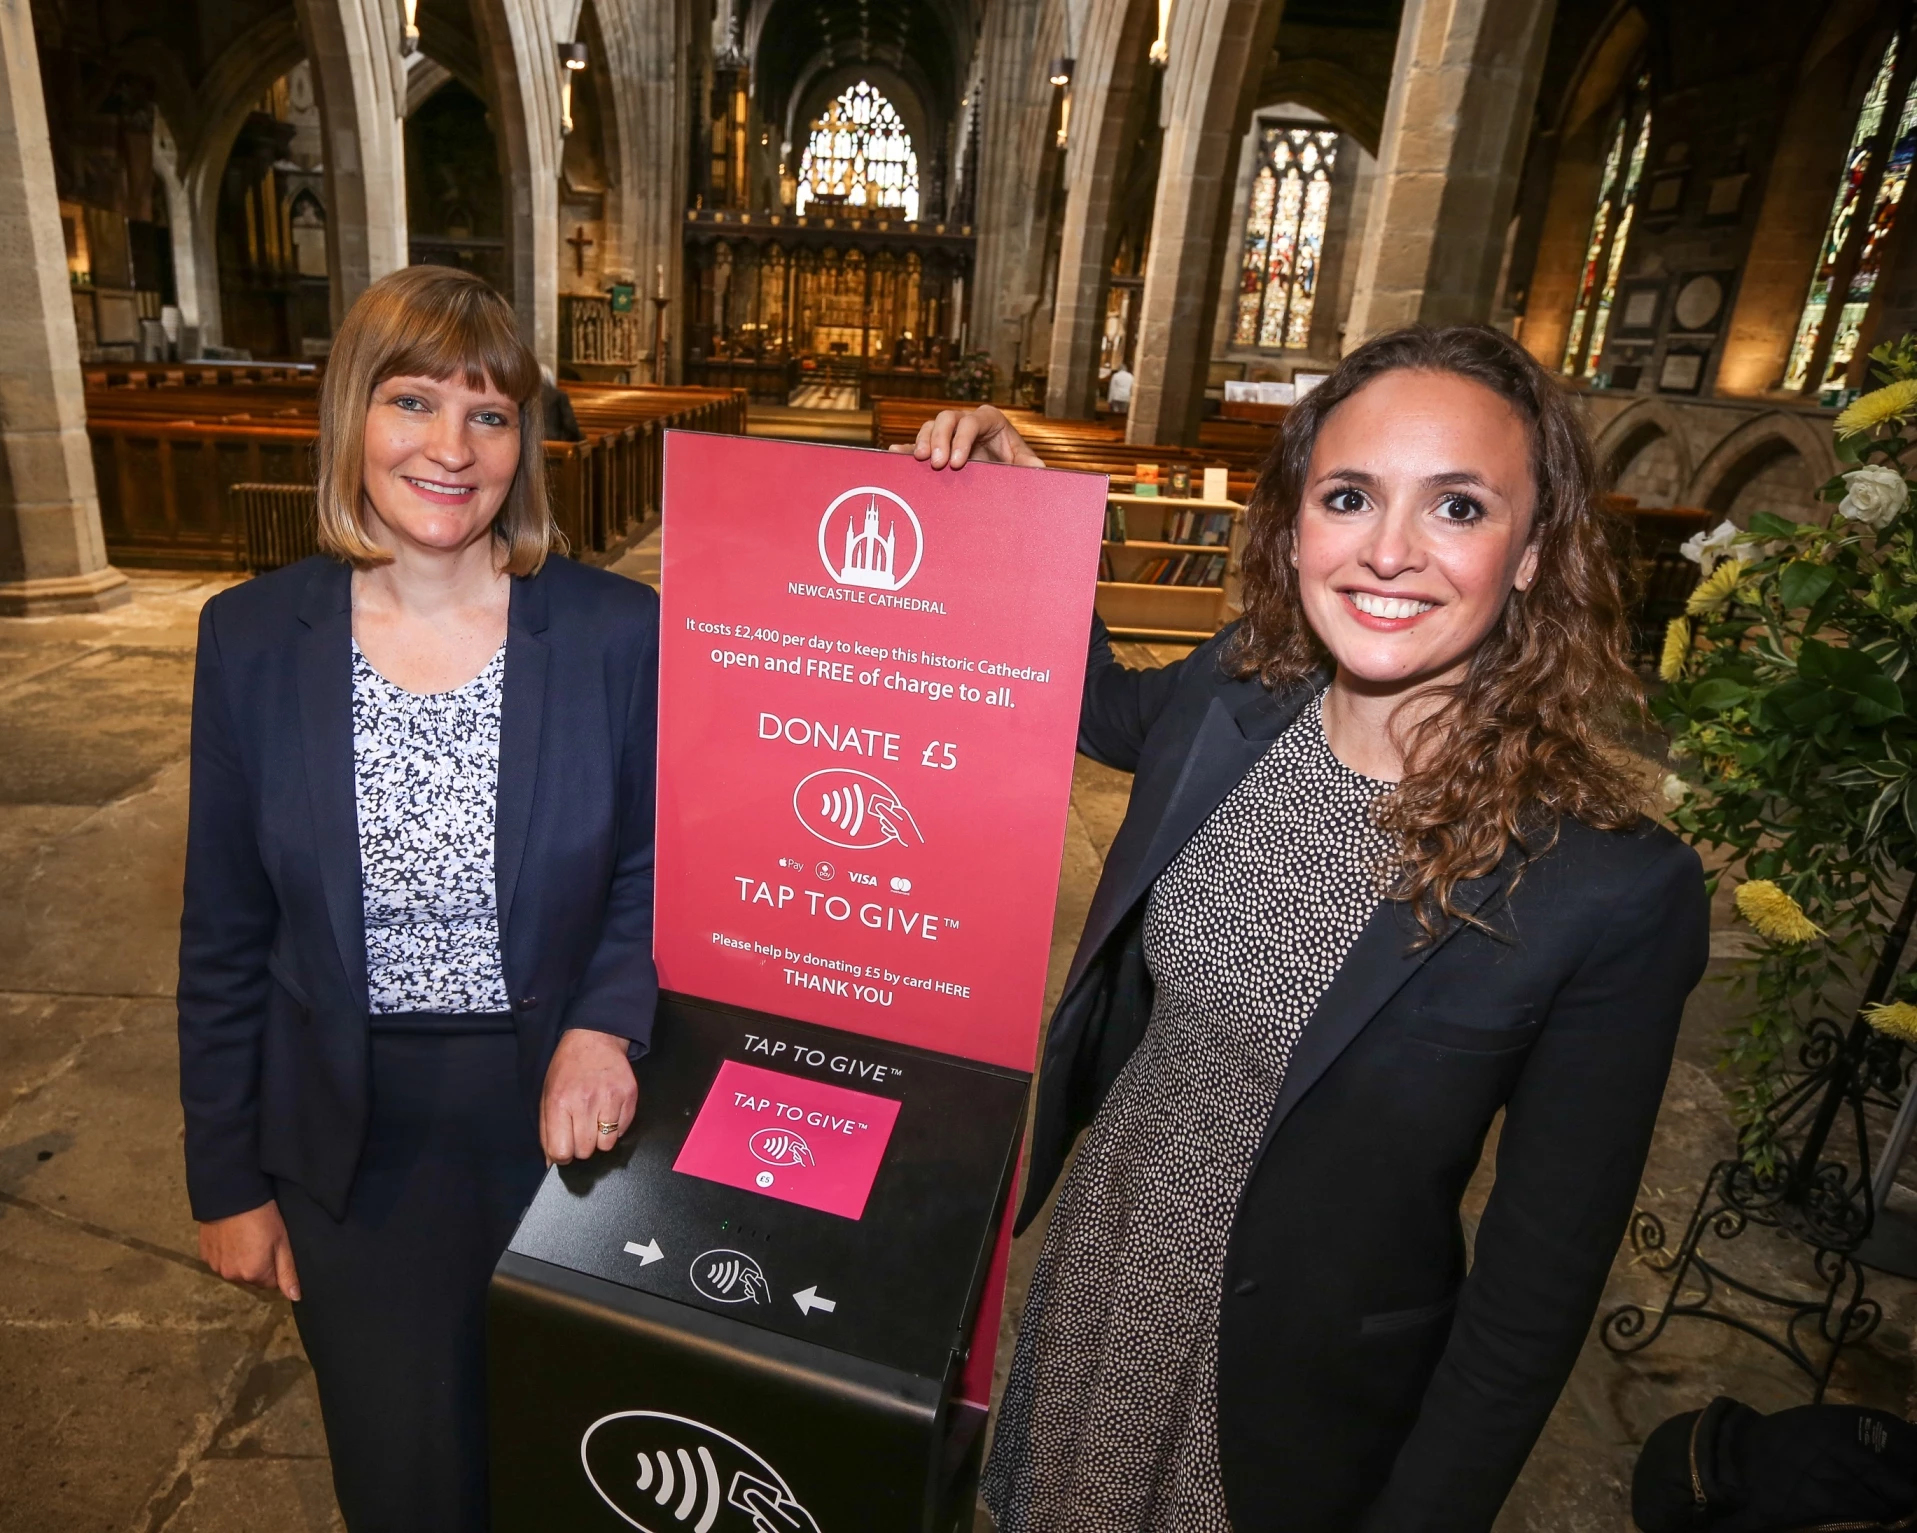 Deborah Graham (left) and Alicia Jelinek (right) with the GoodBox at St Nicholas Cathedral in Newcastle